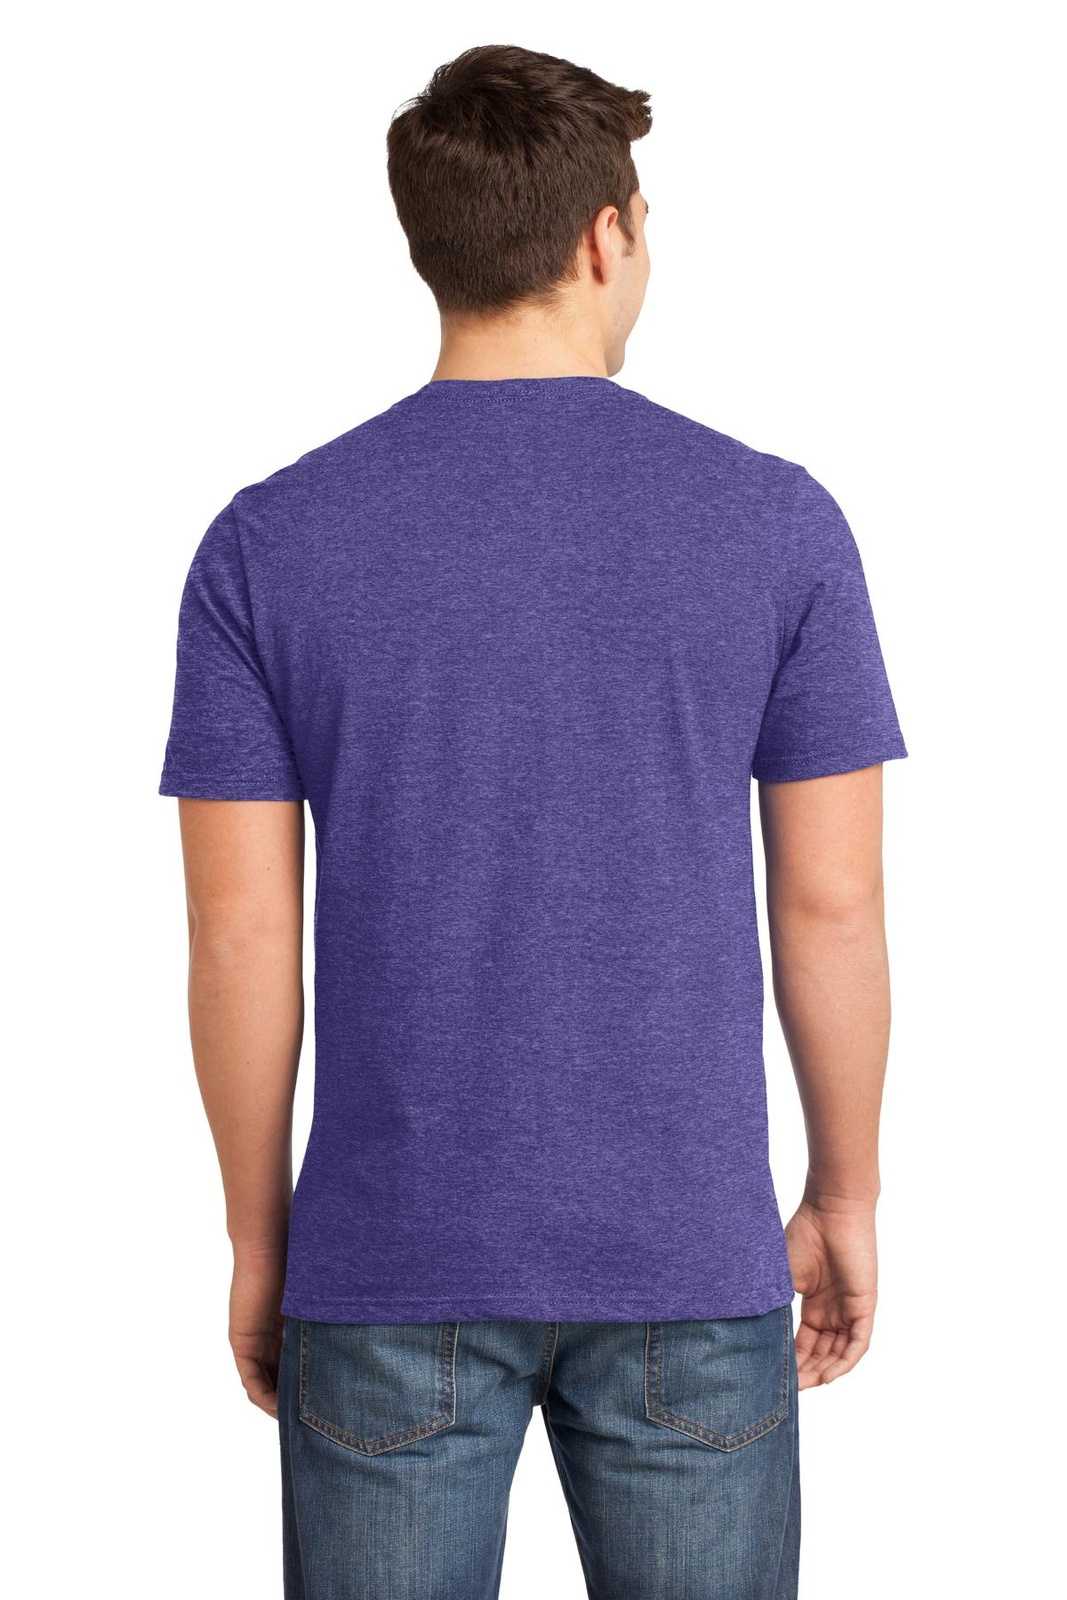 District DT6000 Very Important Tee - Heathered Purple - HIT a Double - 2